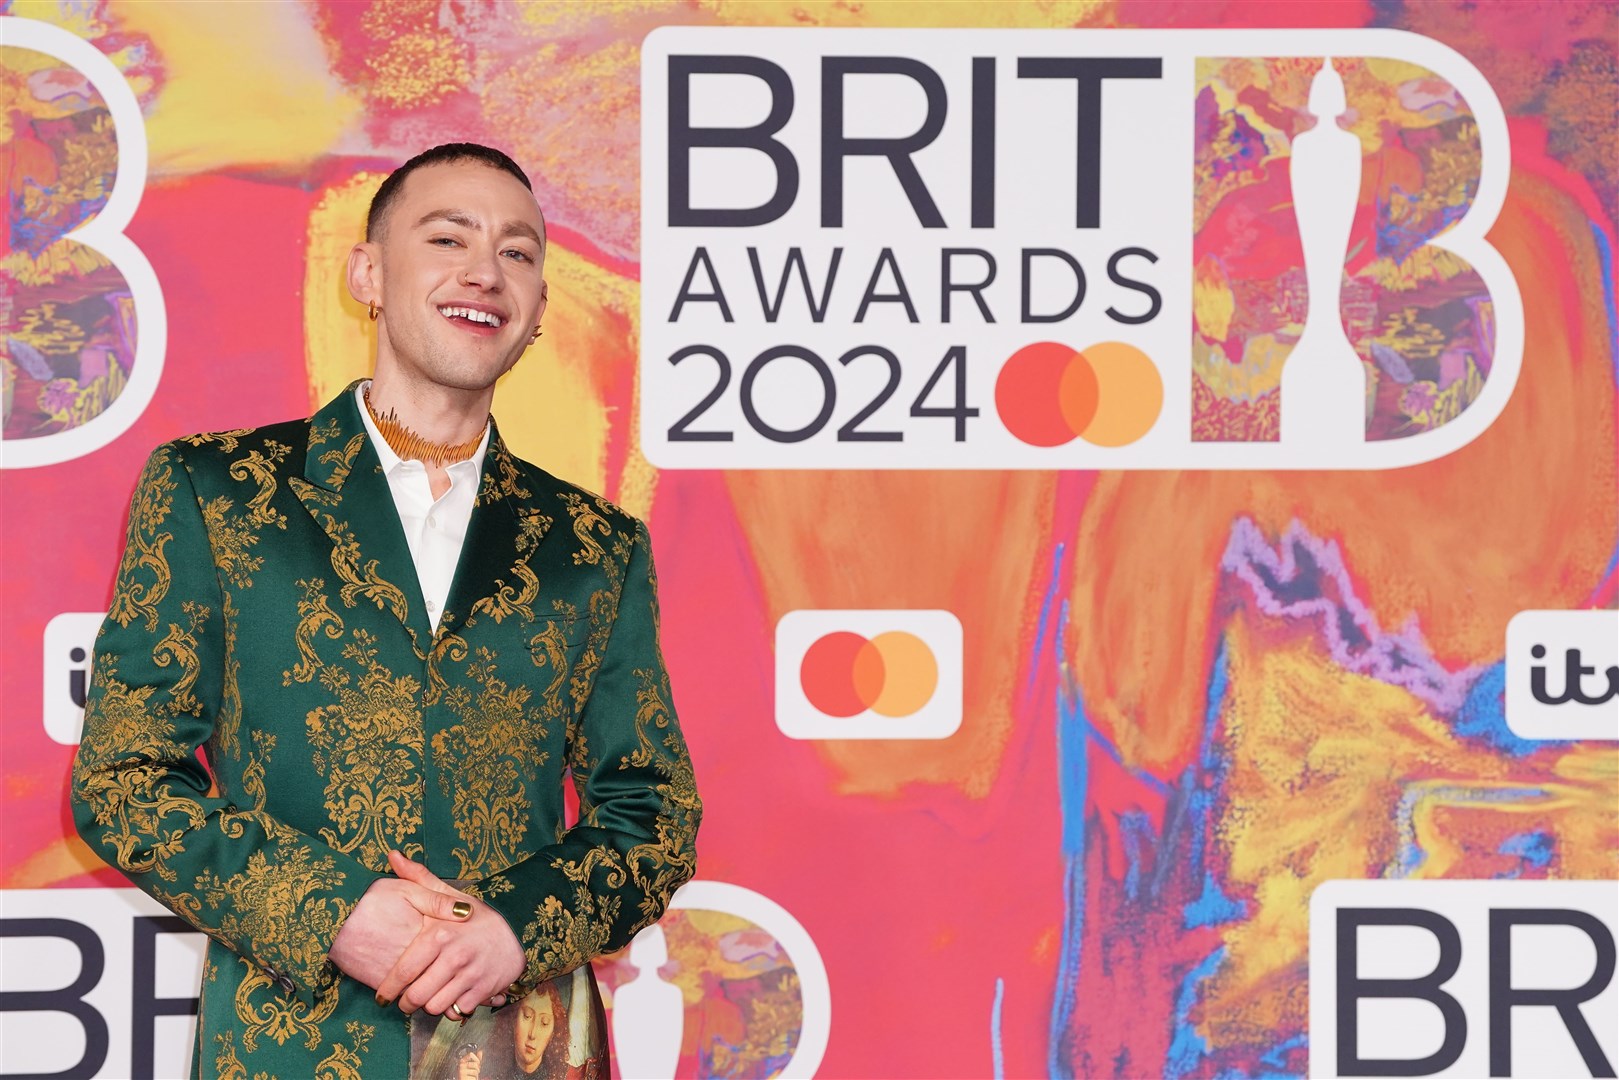 Olly Alexander will face Ireland’s Bambie Thug, Croatia’s Baby Lasagna and Ukraine’s Alyona Alyona and Jerry Heil among other acts in the final (Ian West/PA)